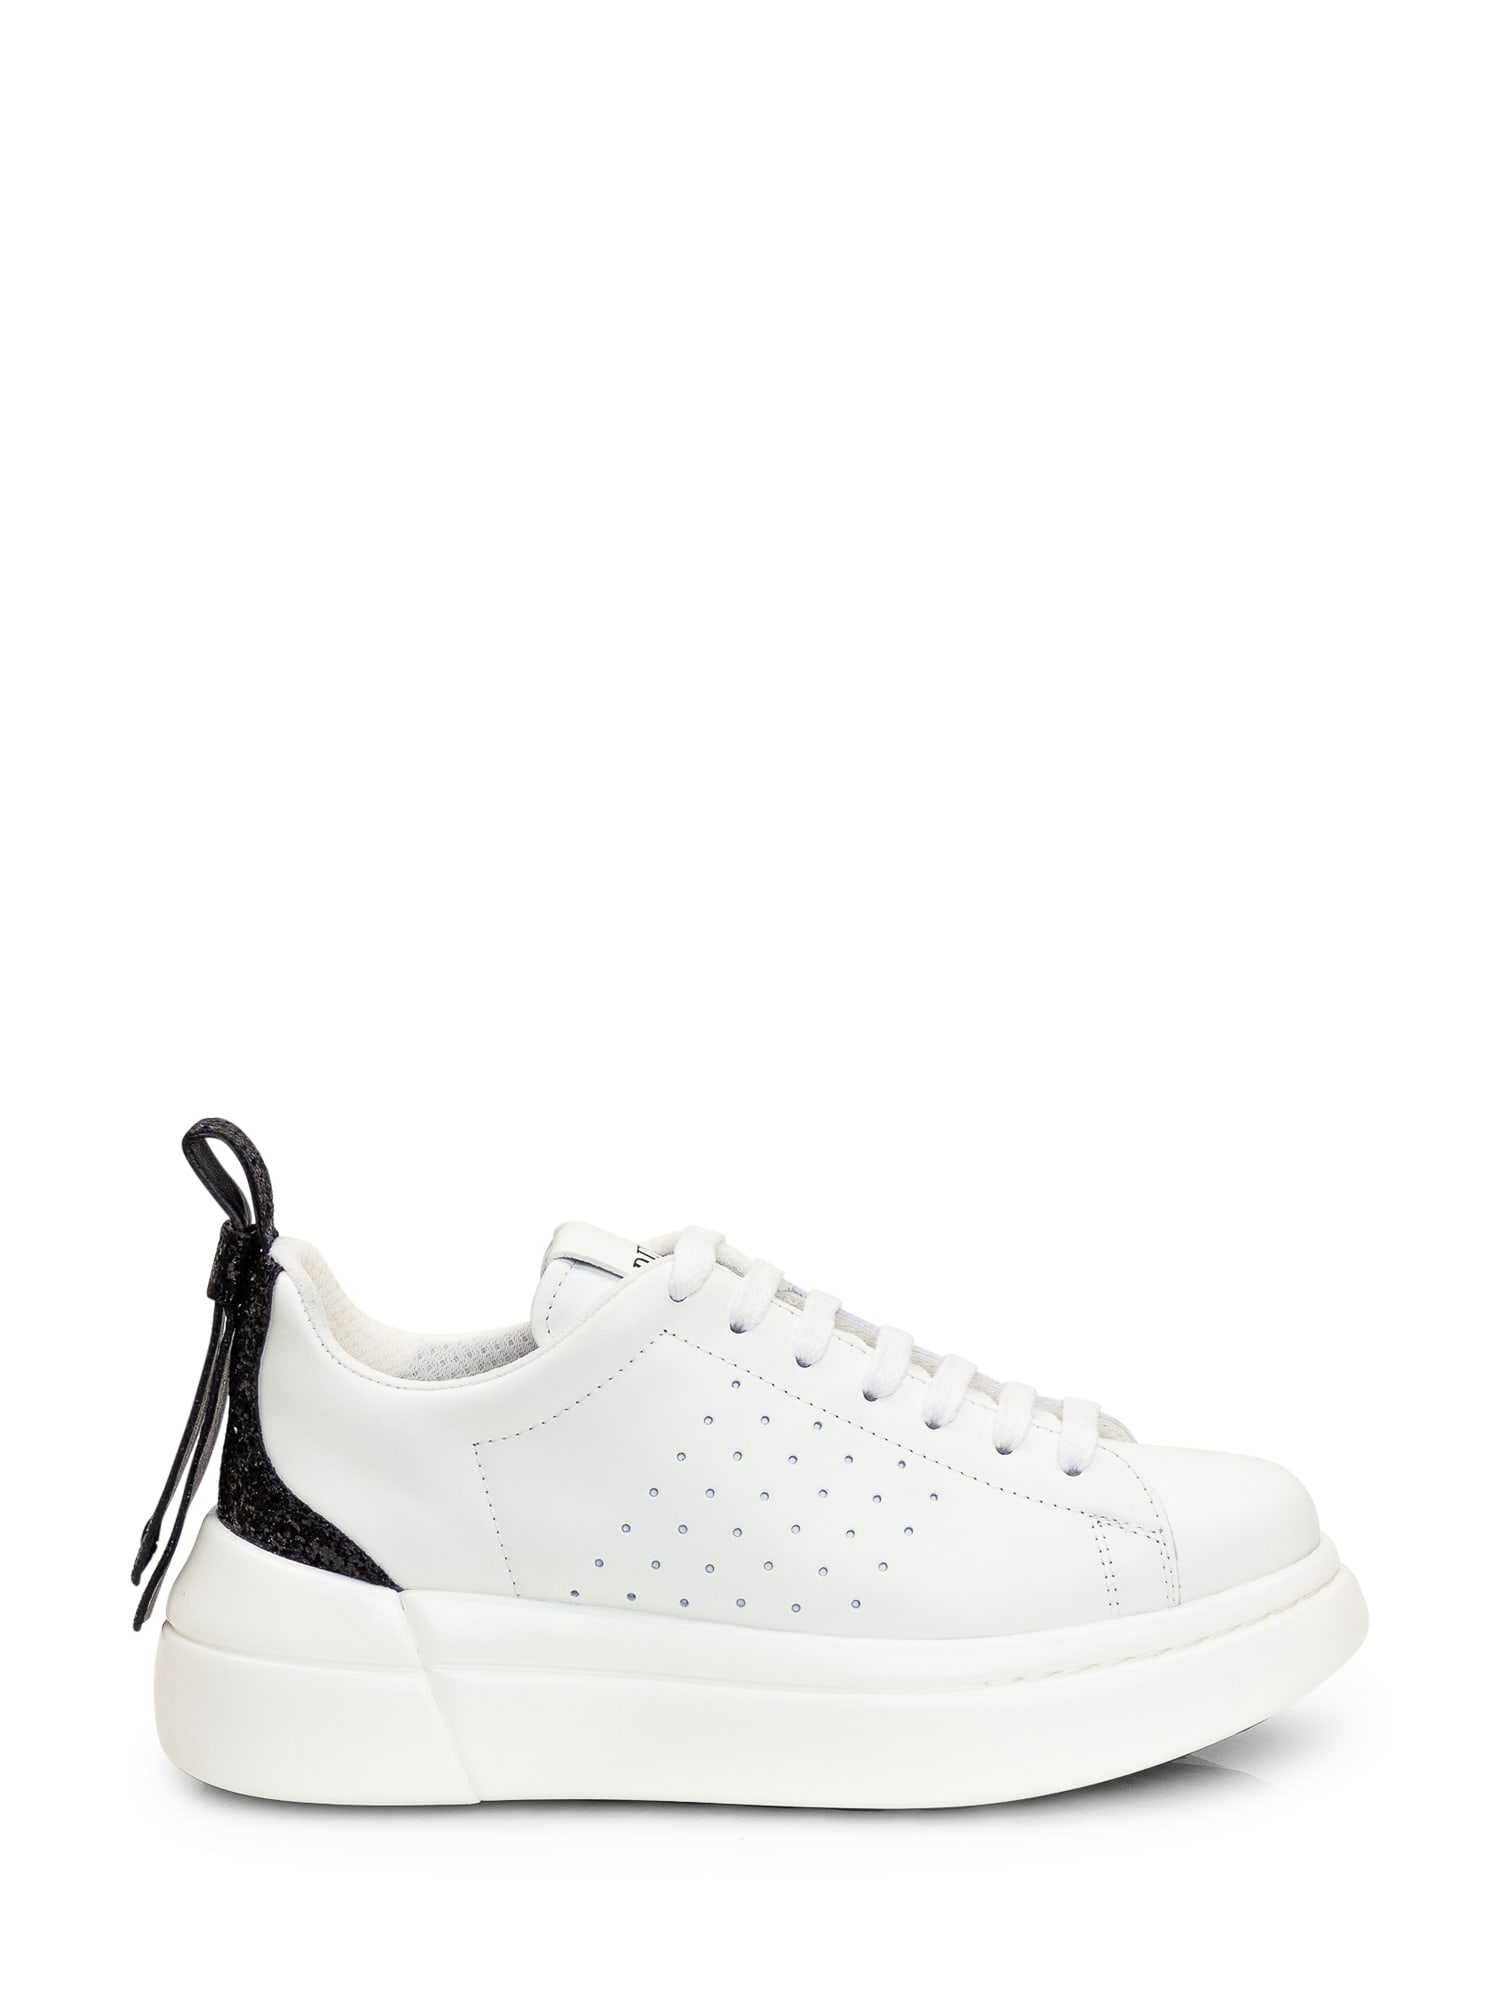 RED VALENTINO SNEAKER WITH GLITTER